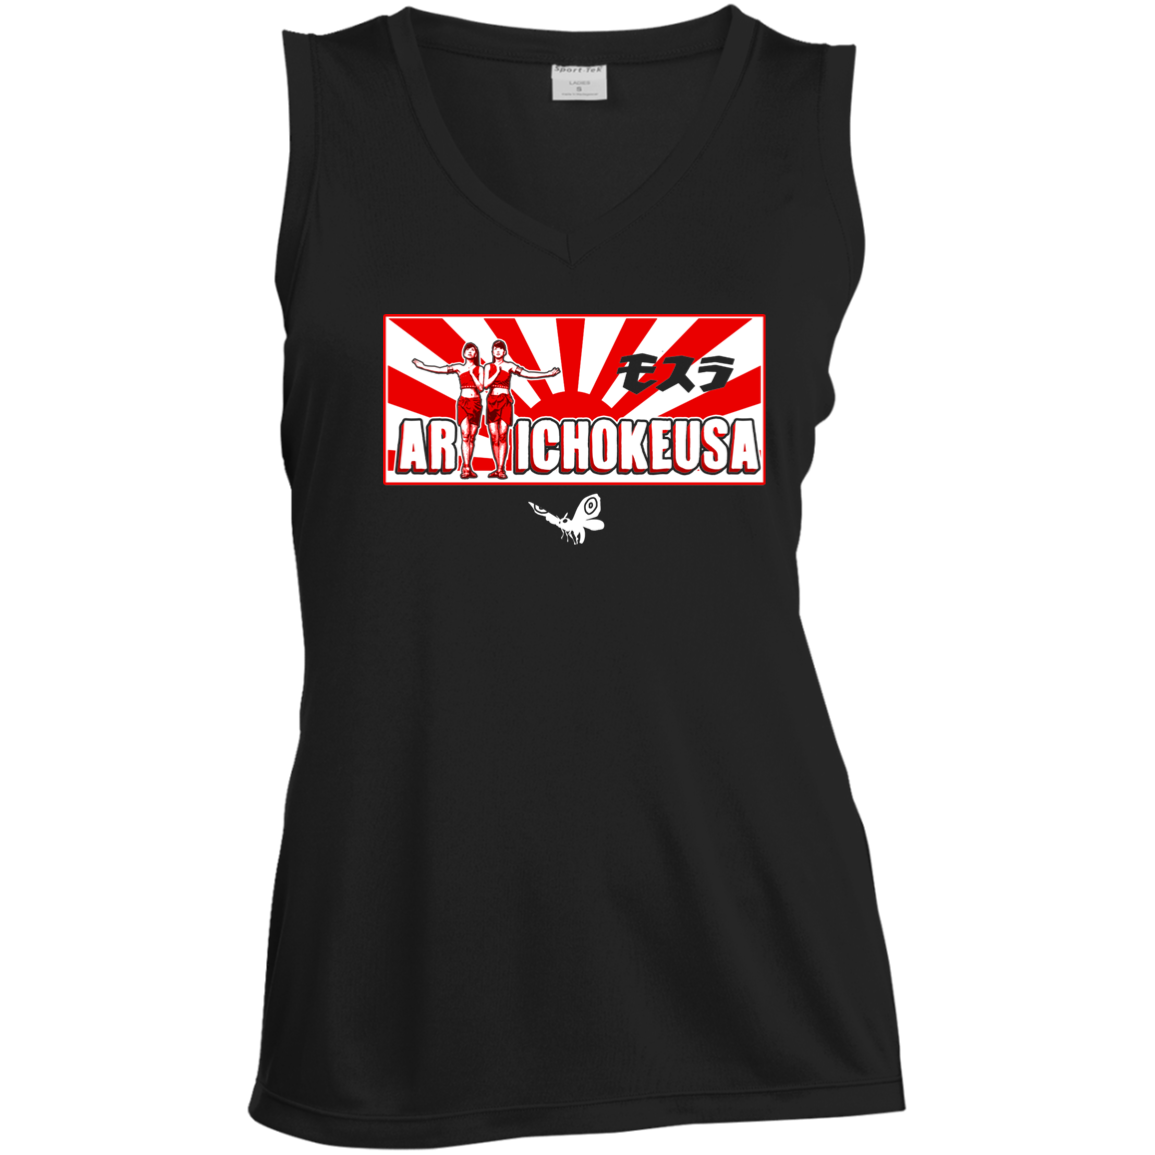 ArtichokeUSA Character and Font design. Shobijin (Twins)/Mothra Fan Art . Let's Create Your Own Design Today. Ladies' Sleeveless V-Neck